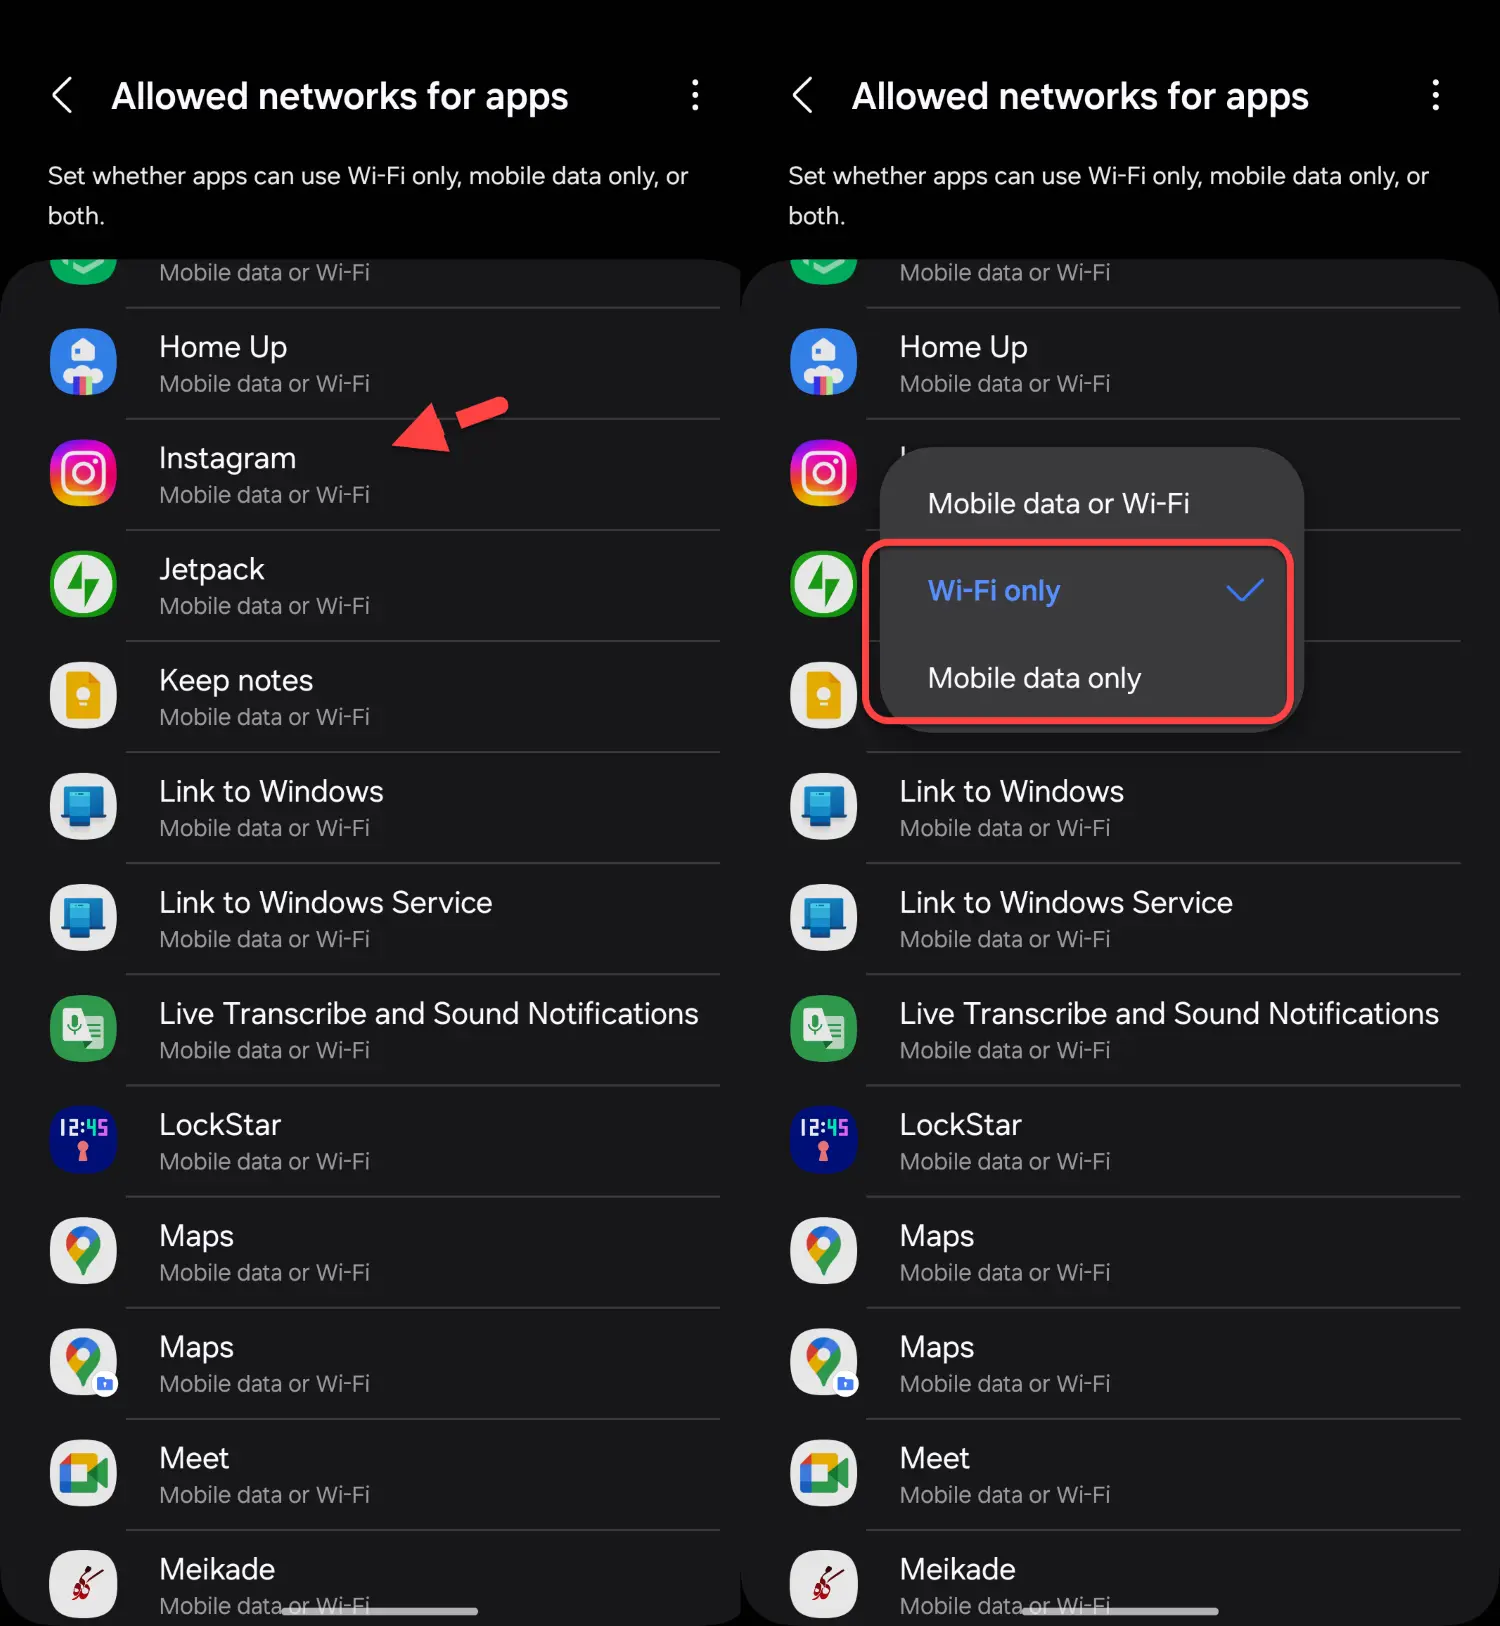 How to Turn Off Mobile Data/Wi-Fi for Certain Apps on Samsung